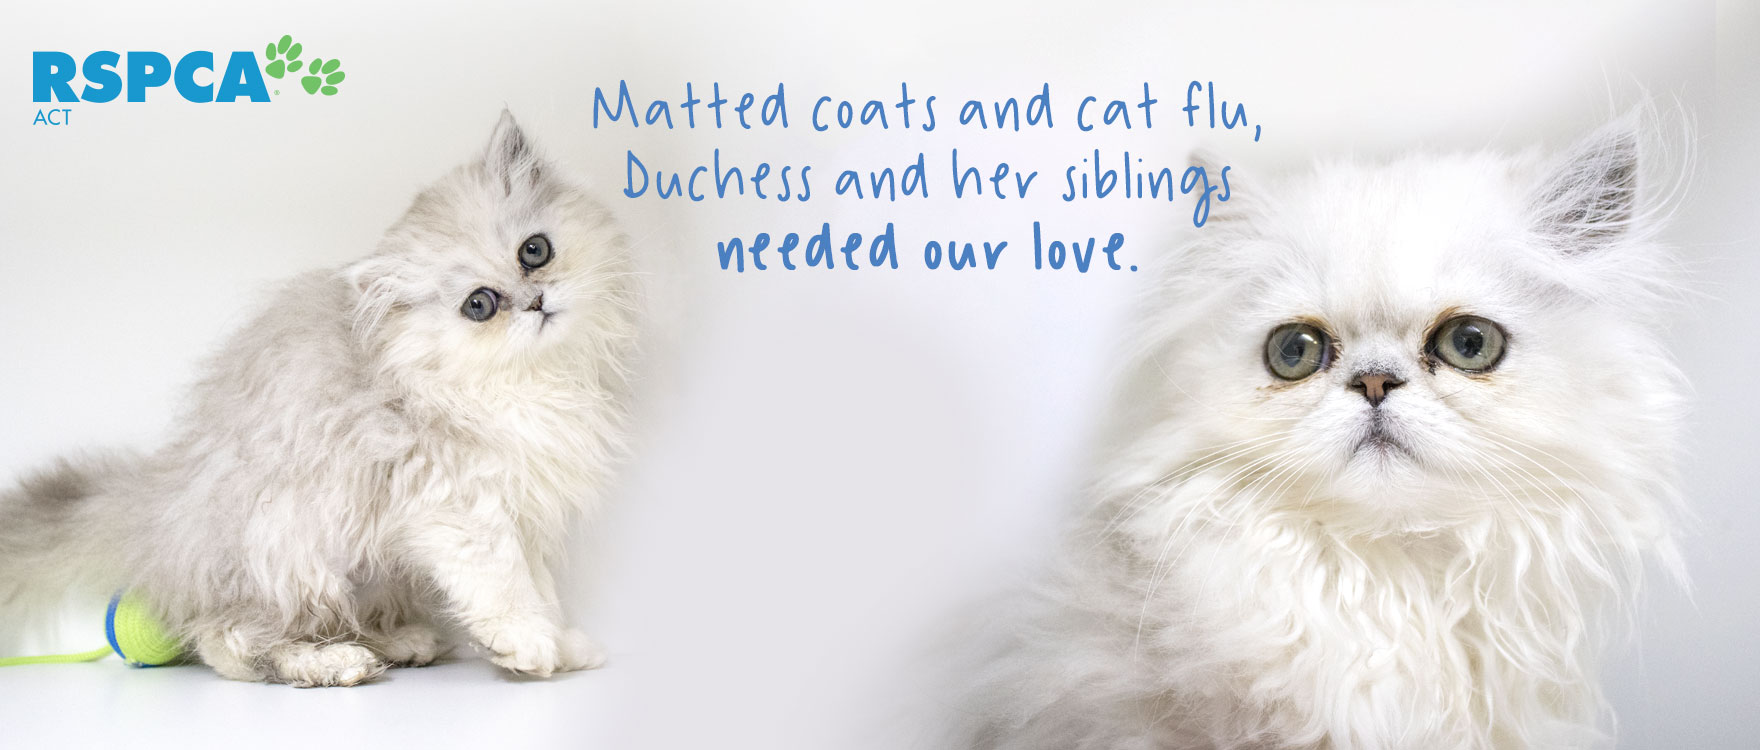 Matted coats and cat flu, Duchess and her siblings needed our love.